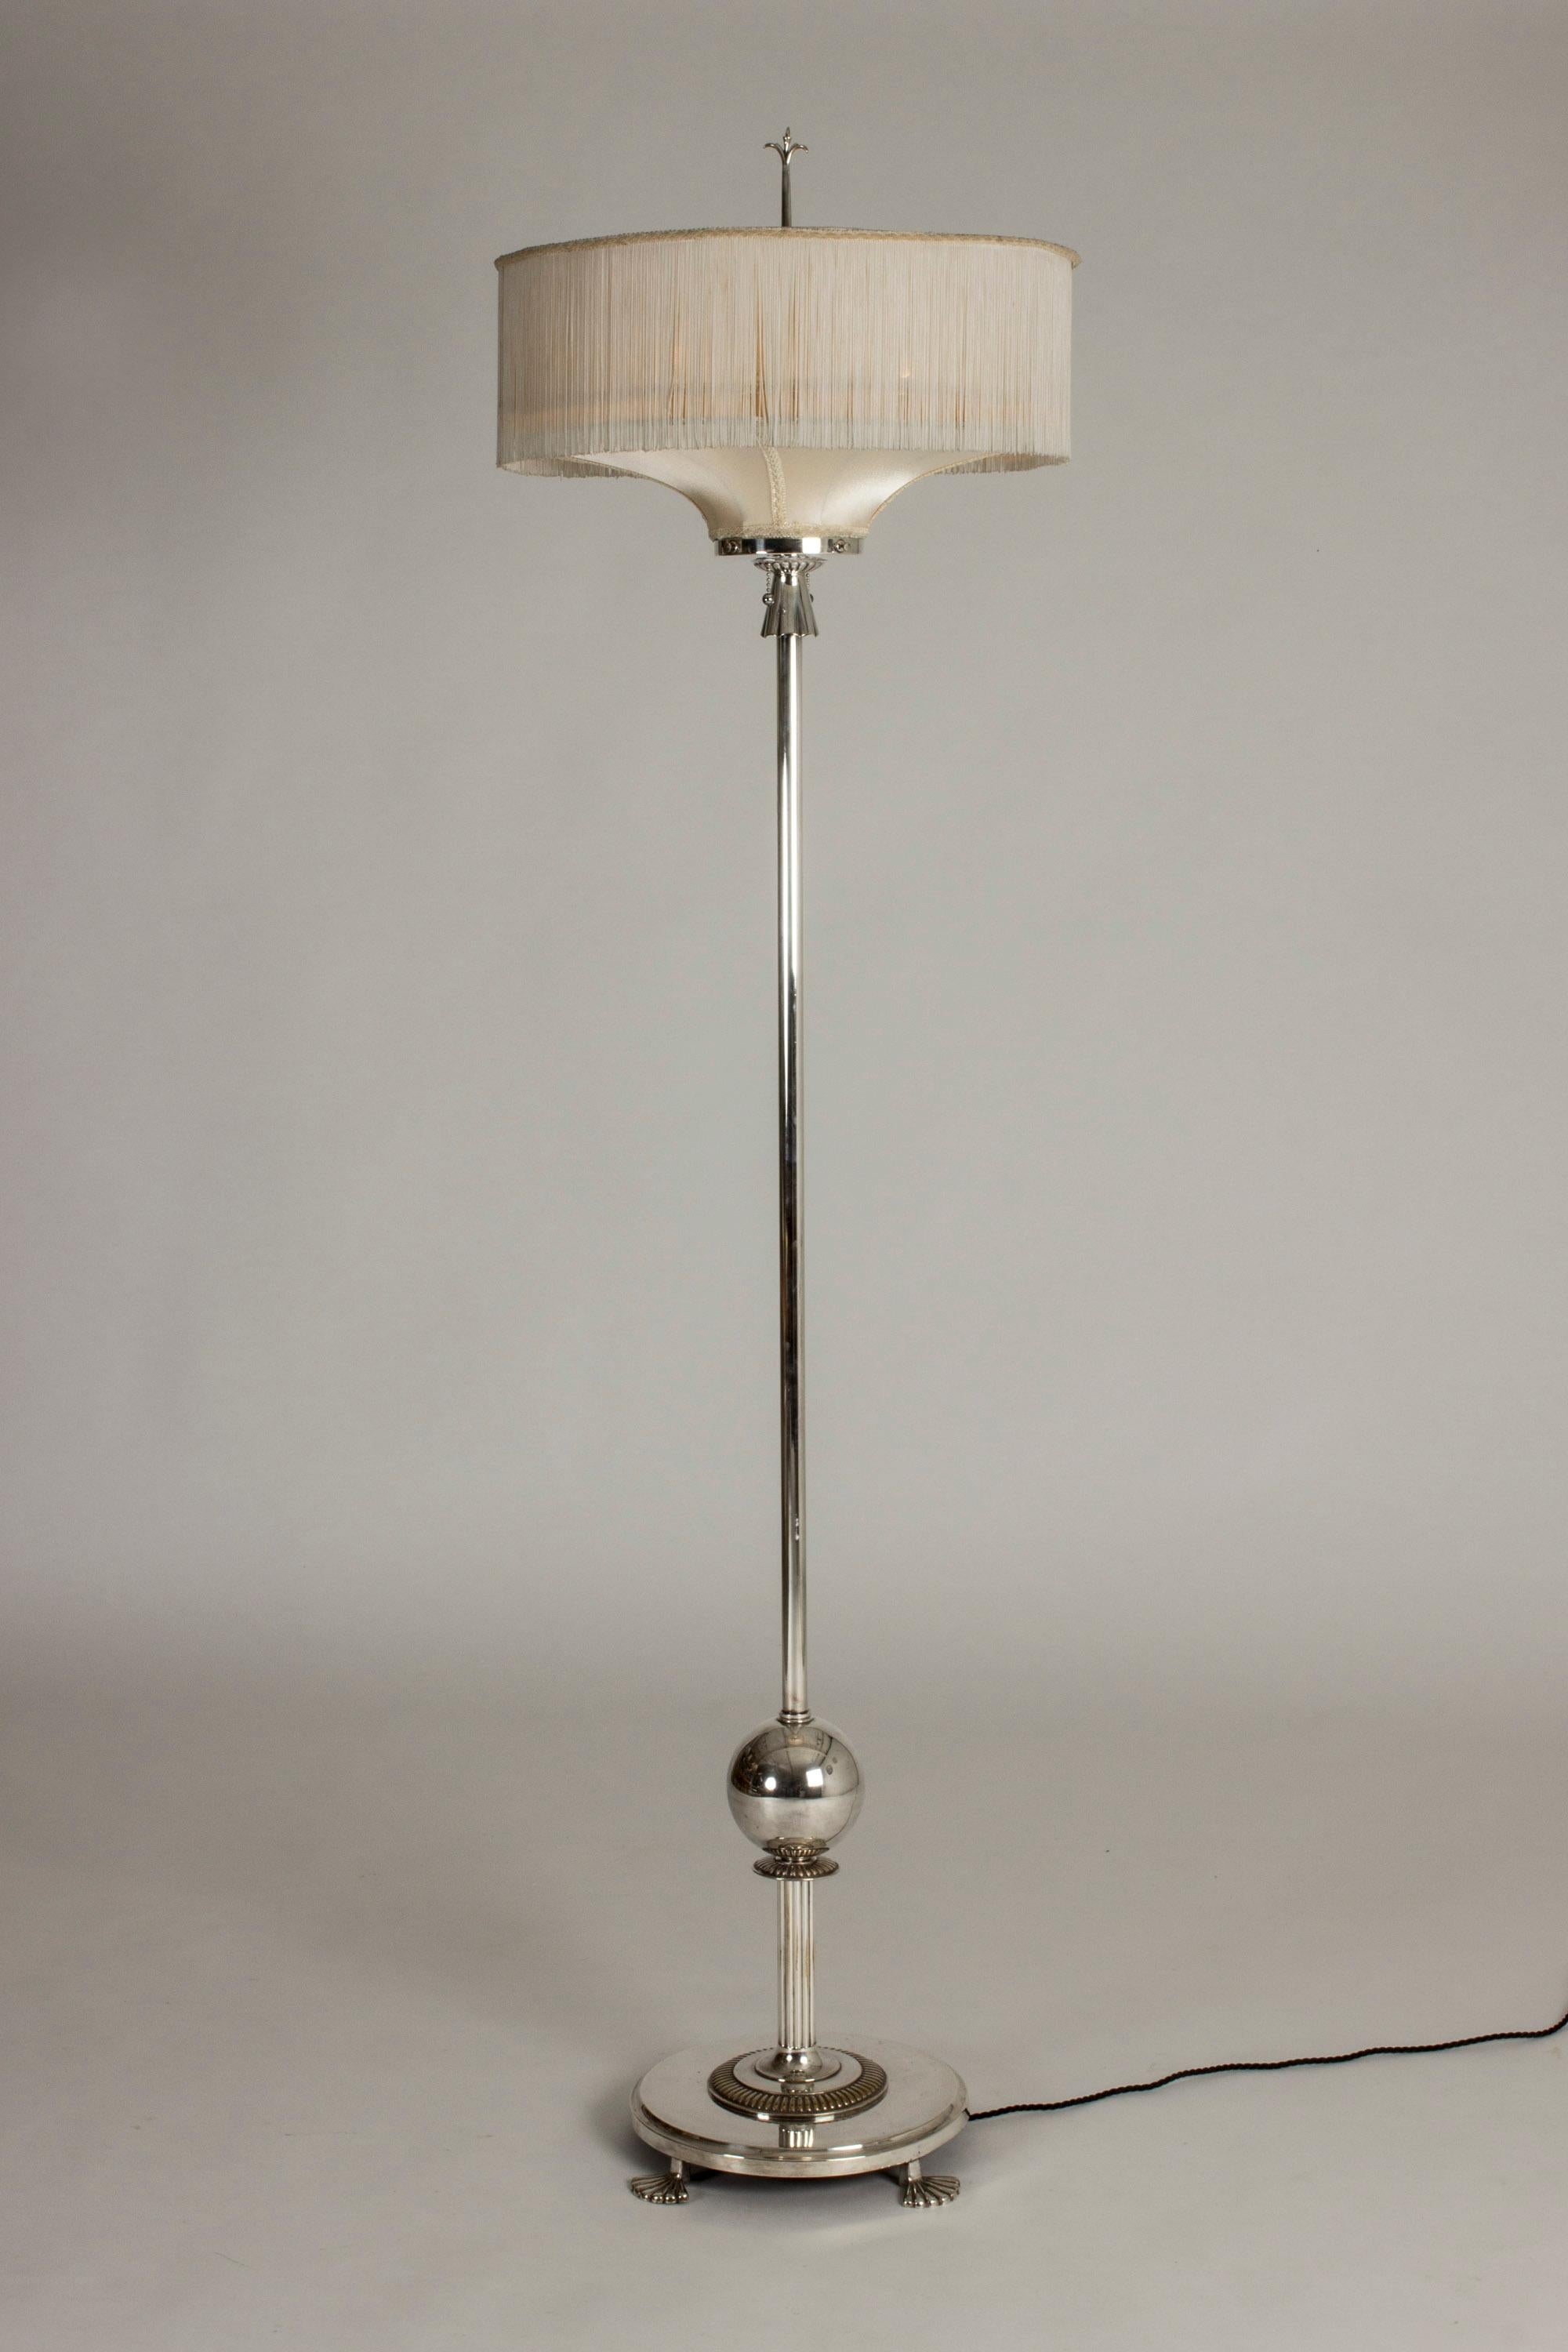 Striking Swedish grace floor lamp by Elis Bergh. Very tall, with a shade dressed with fringe. Beautiful details in the form of a stylized metal lily on top and four lions feet at the base. The two light sources inside can be turned on separately to